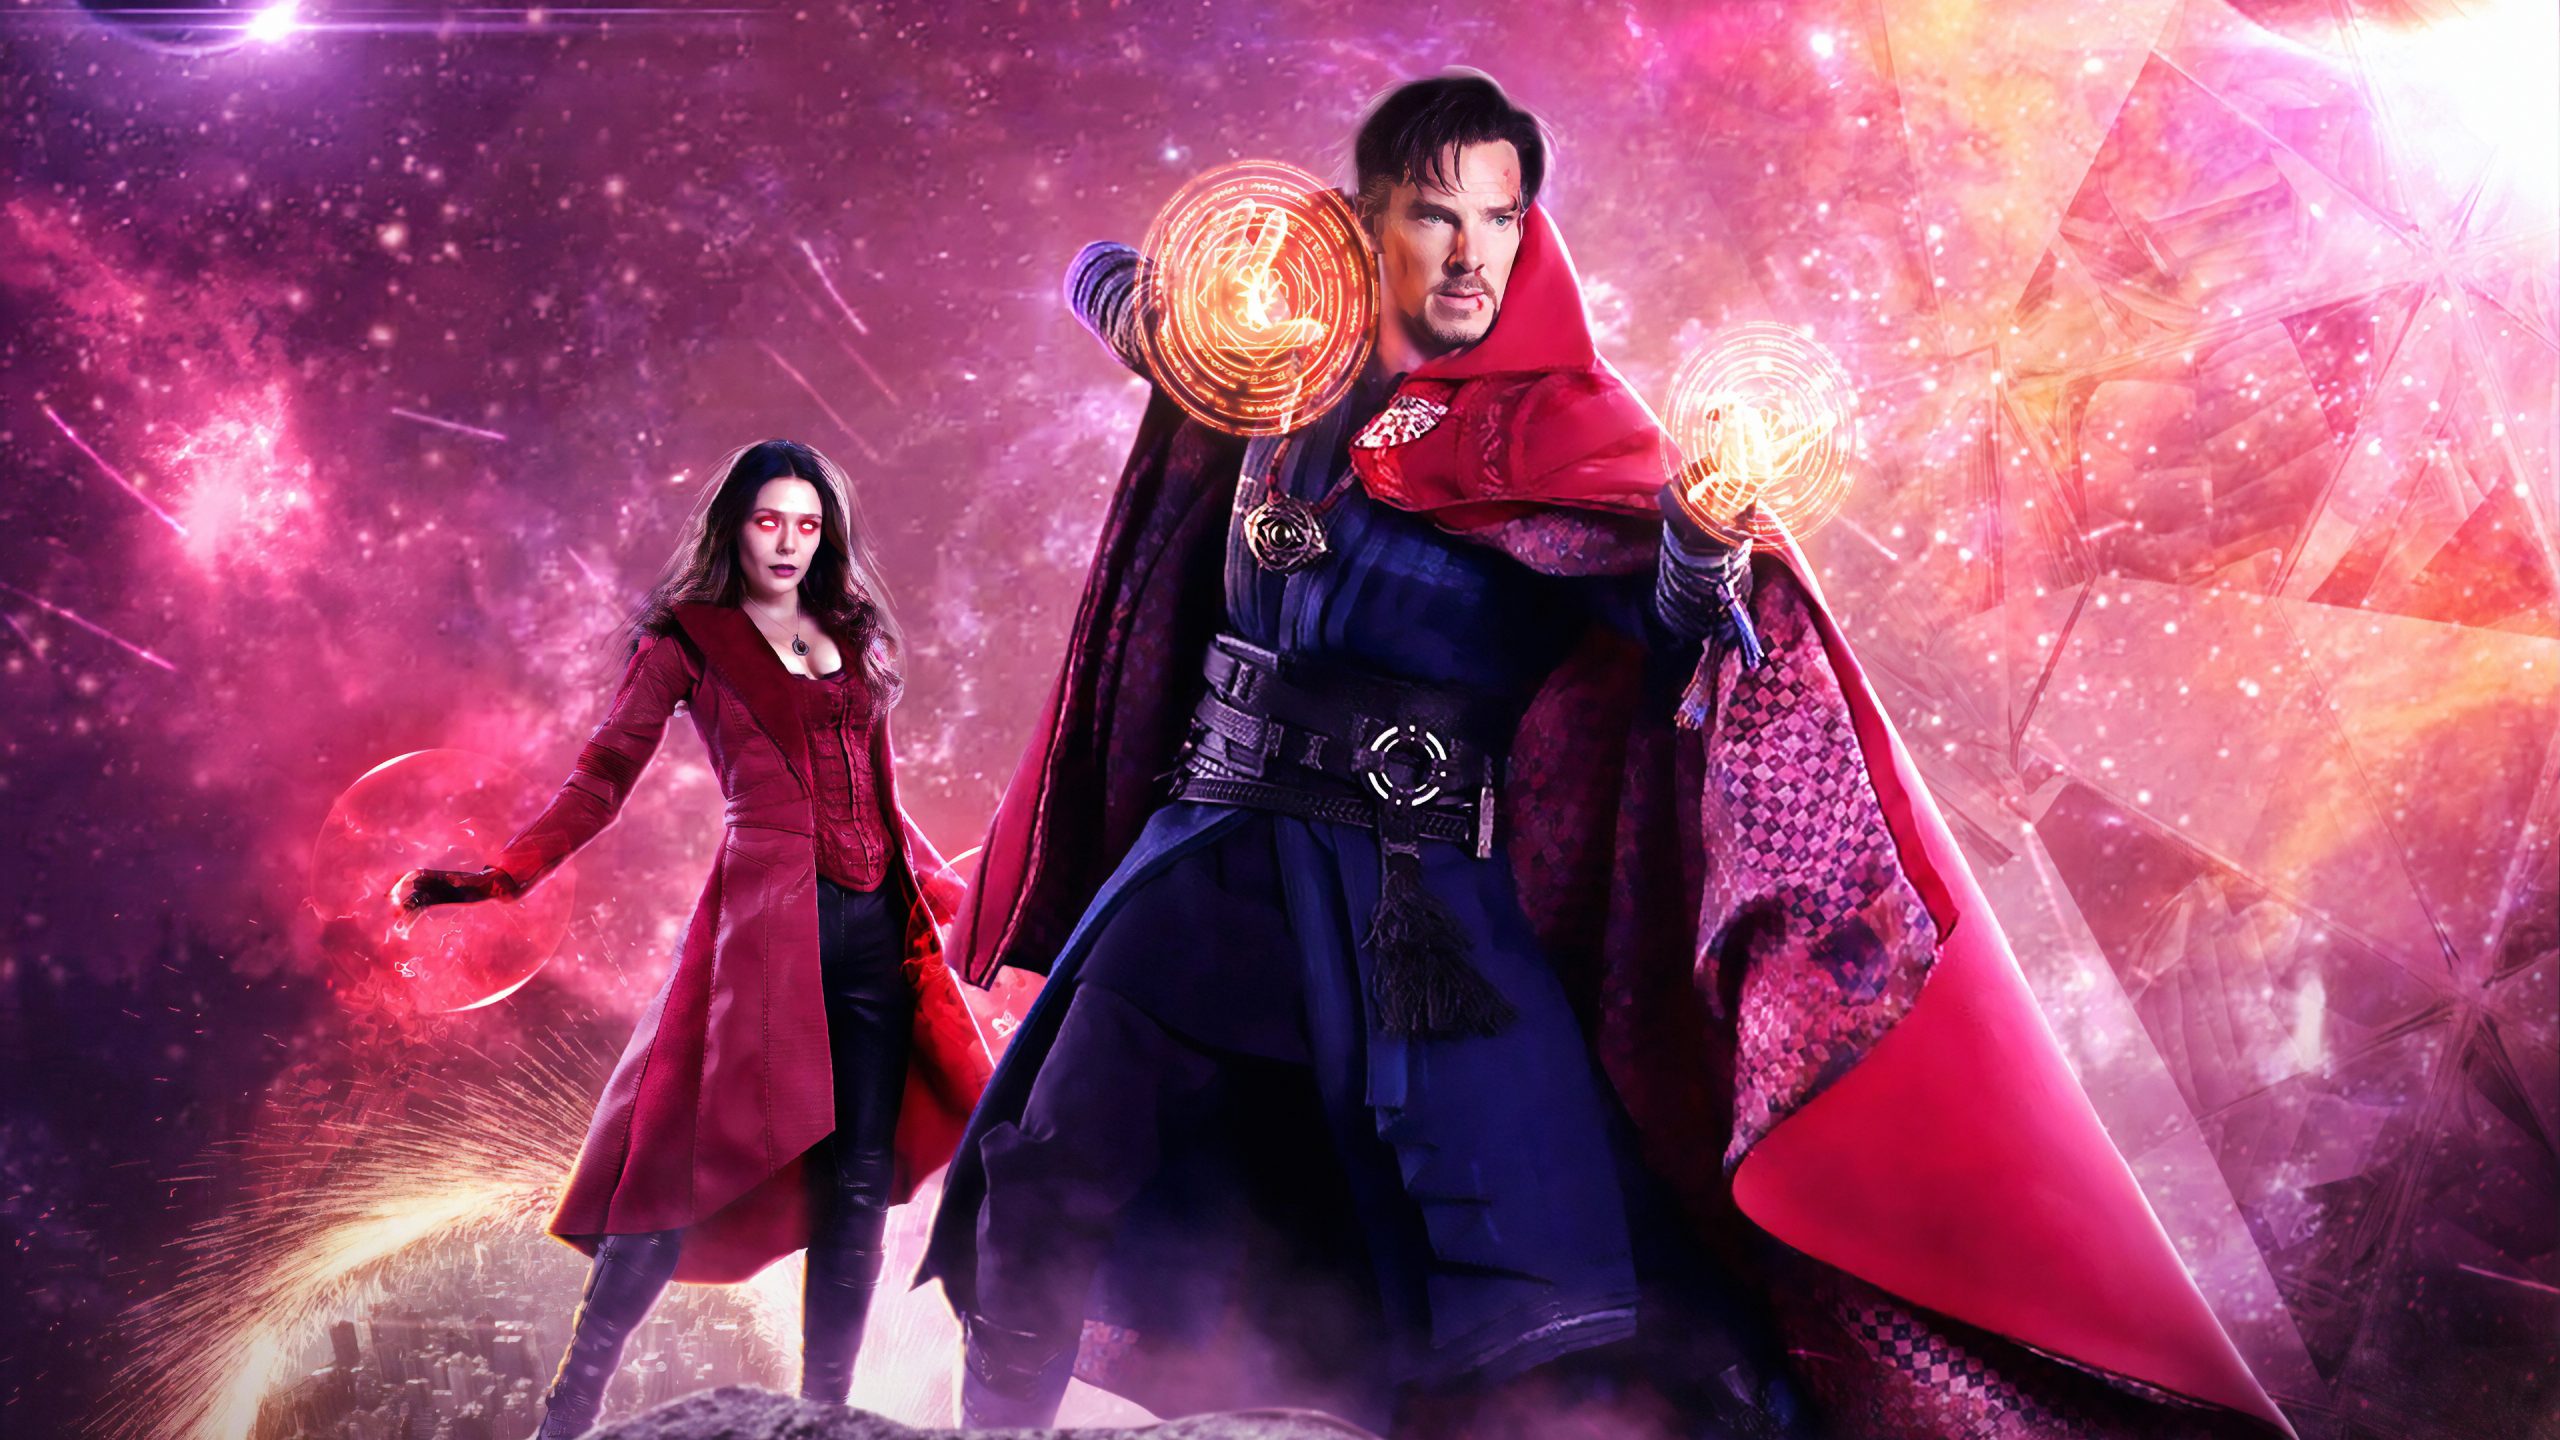 Will Tom Cruise feature in Doctor Strange in the Multiverse of Madness.